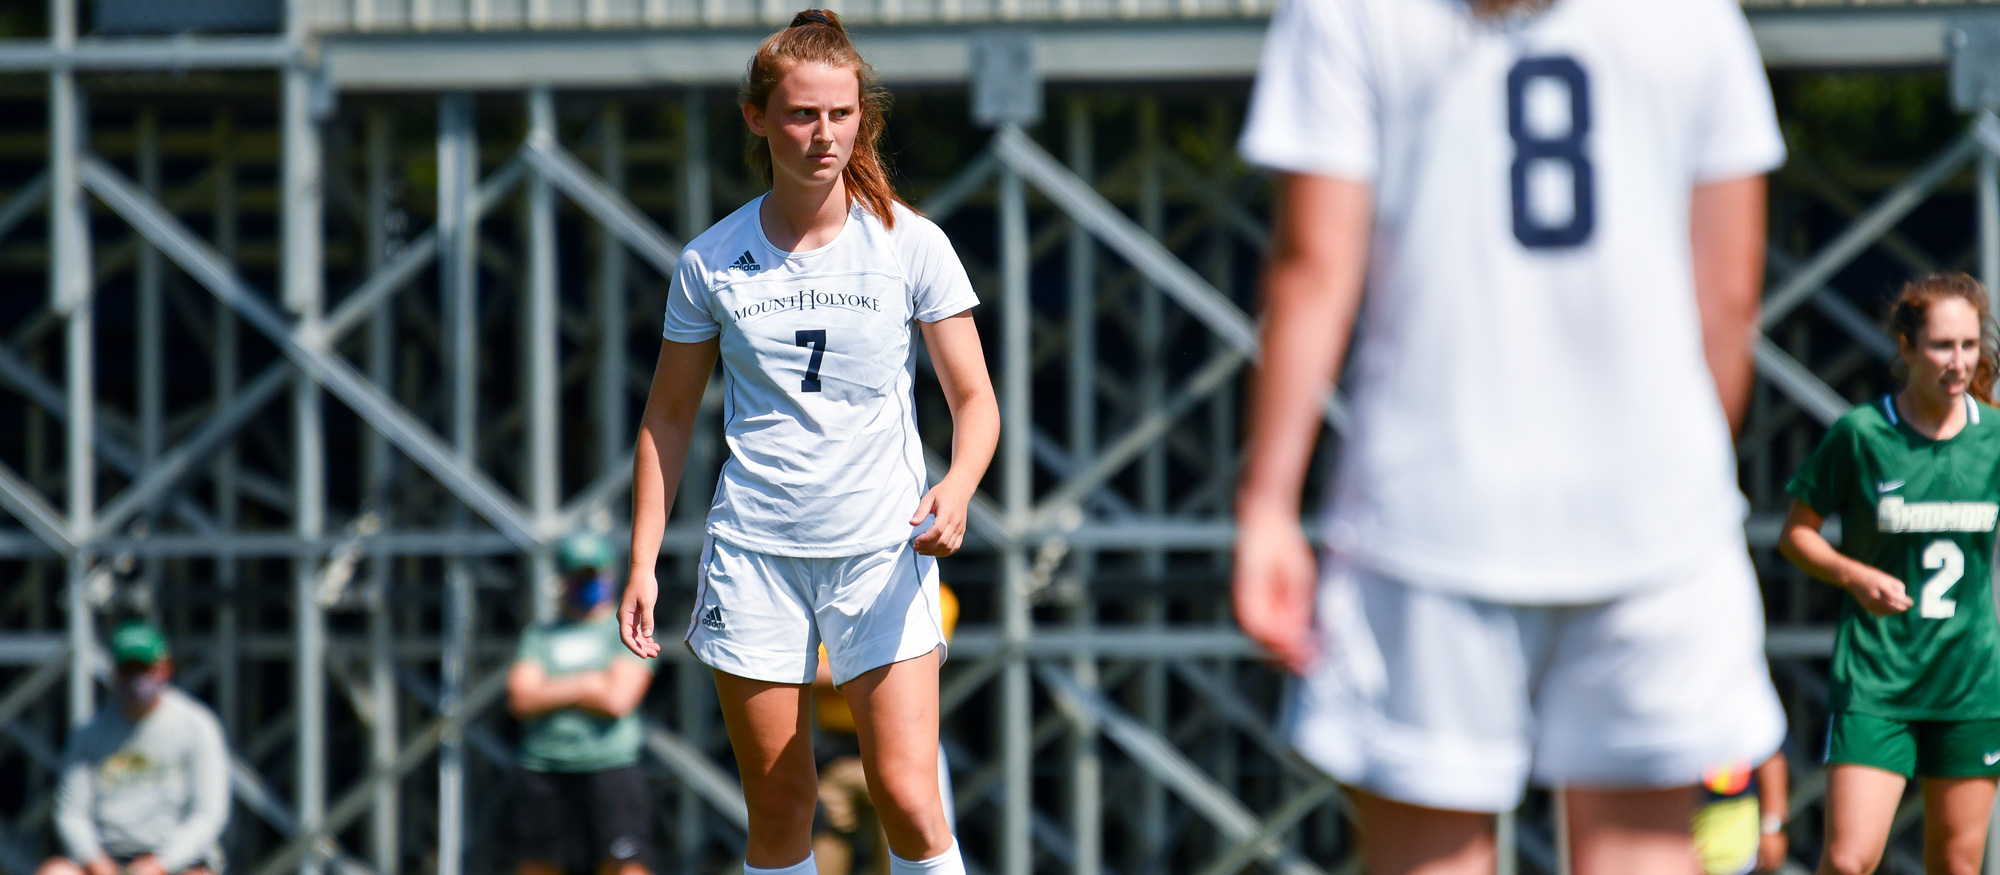 Hannah Keochakian scored her seventh goal of the season and her second game-winning goal as Mount Holyoke defeated Smith 1-0 on Oct. 19, 2022. (RJB Sports file photo)